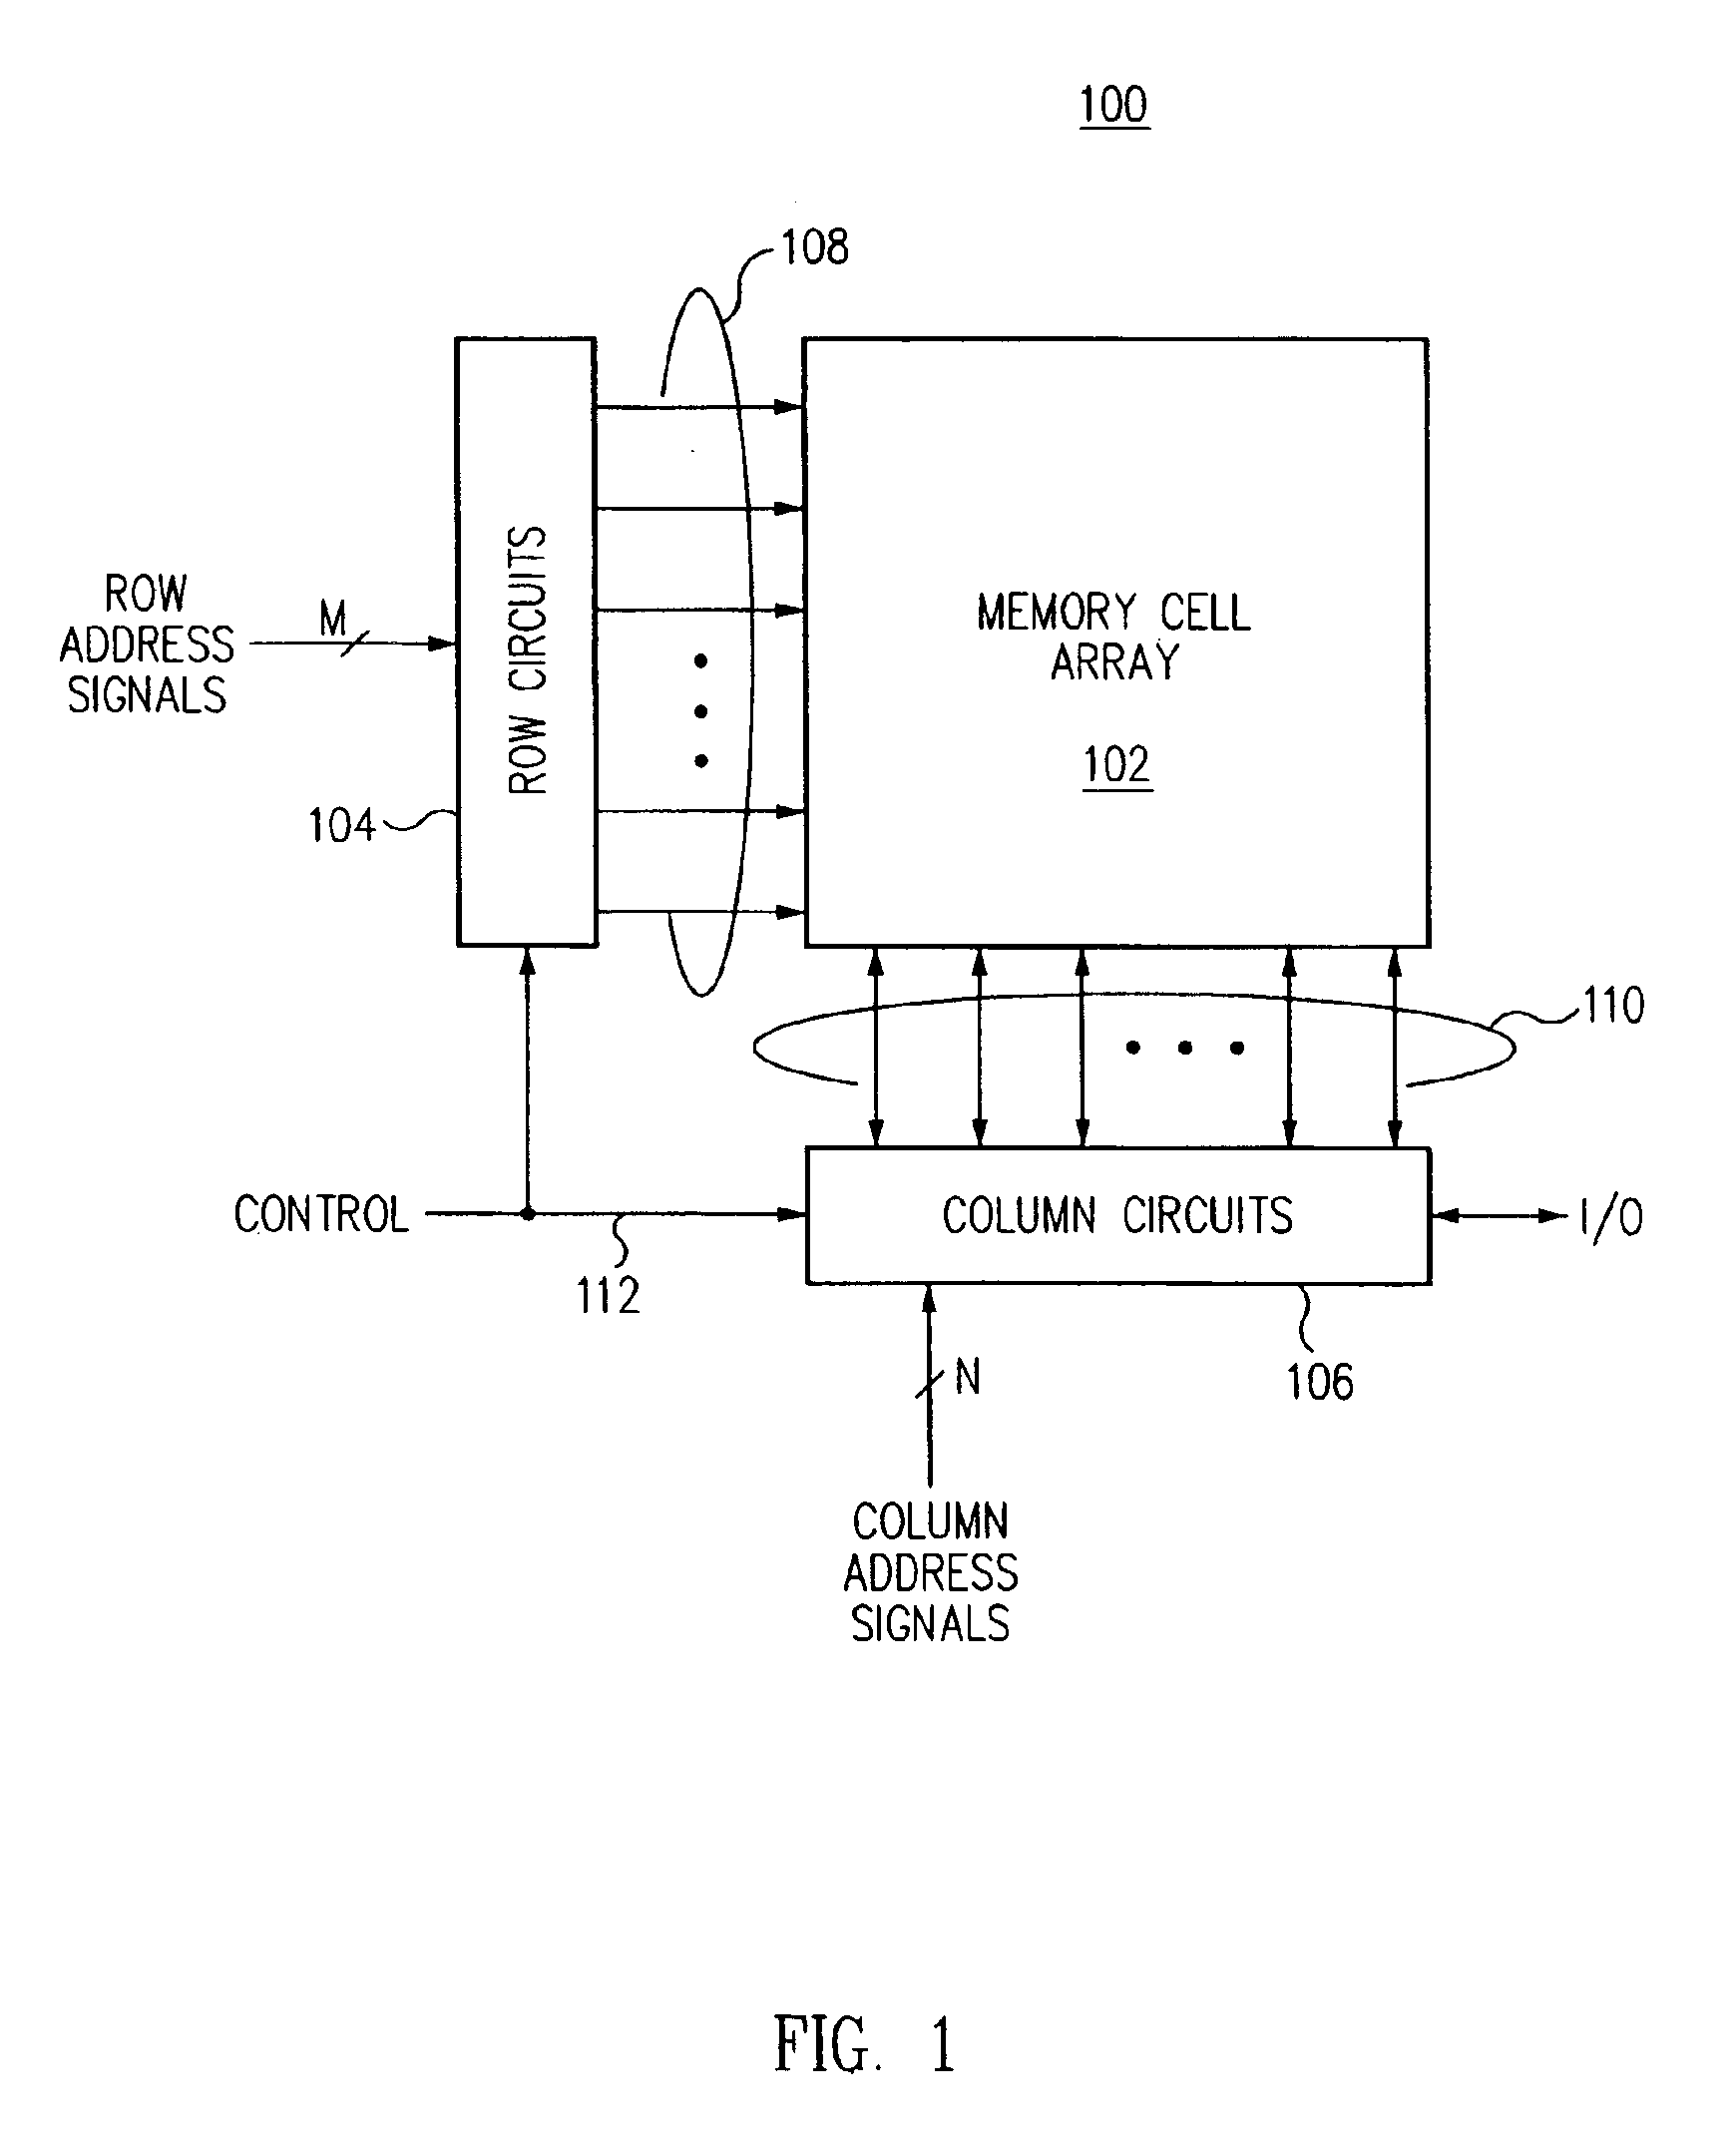 Apparatus and method for disturb-free programming of passive element memory cells